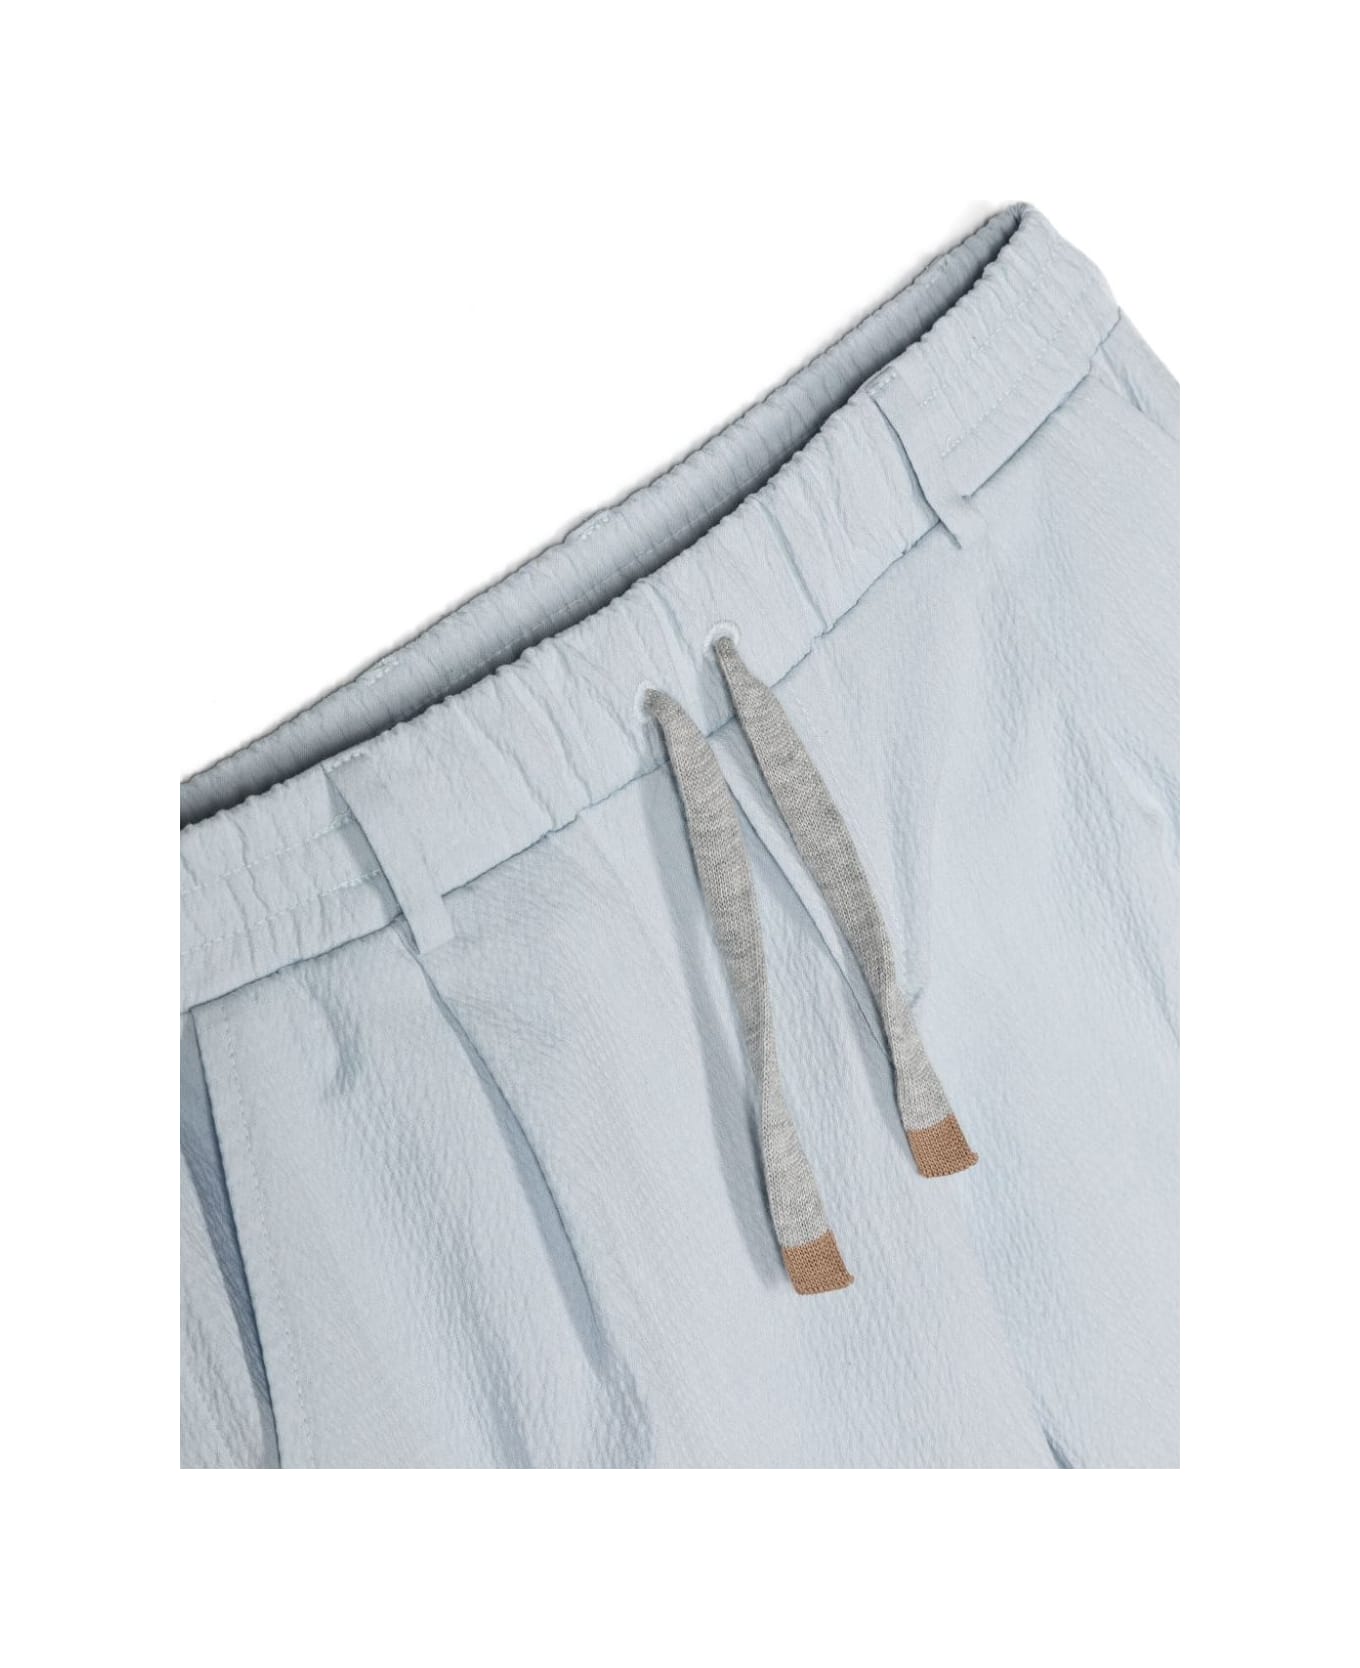 Eleventy Light Blue Joggers Pants With Contrasting Drawstring - Blue